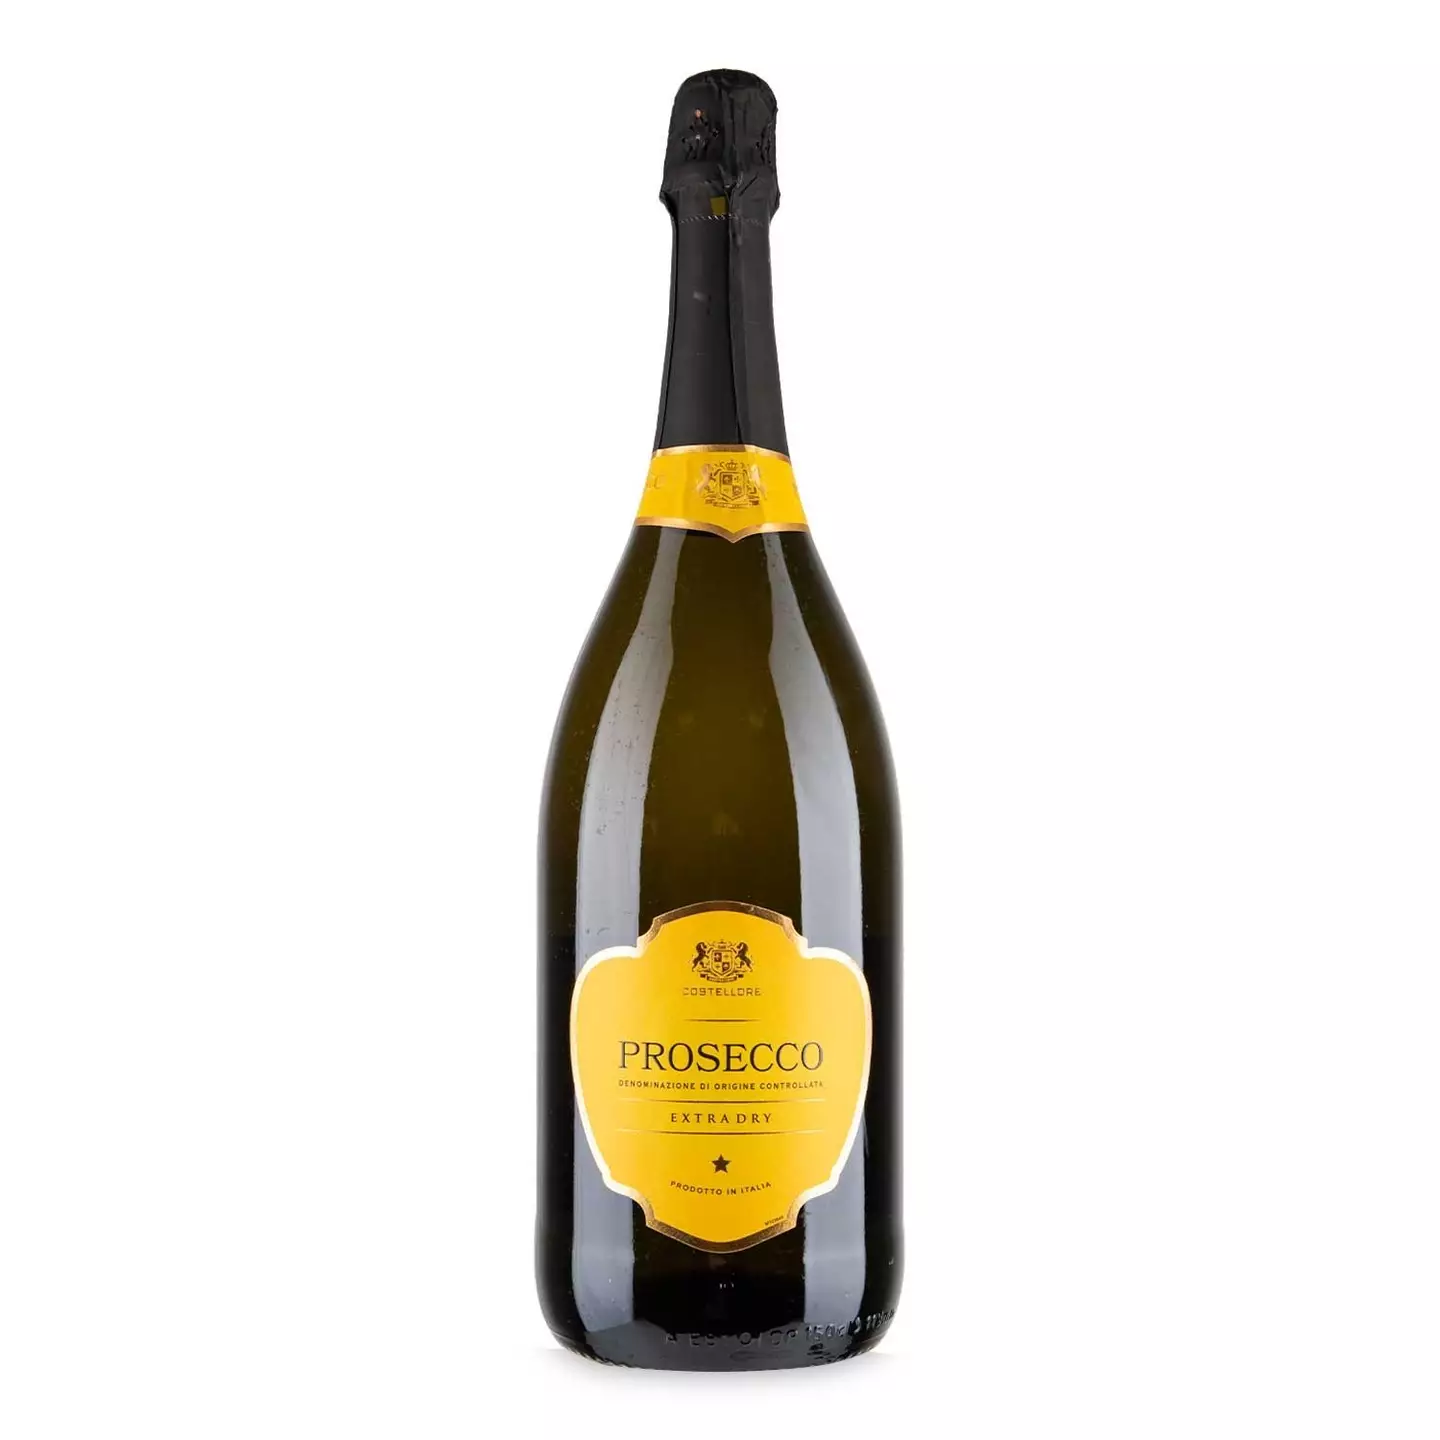 Aldi's magnum of prosecco can now be bought for less than a tenner.